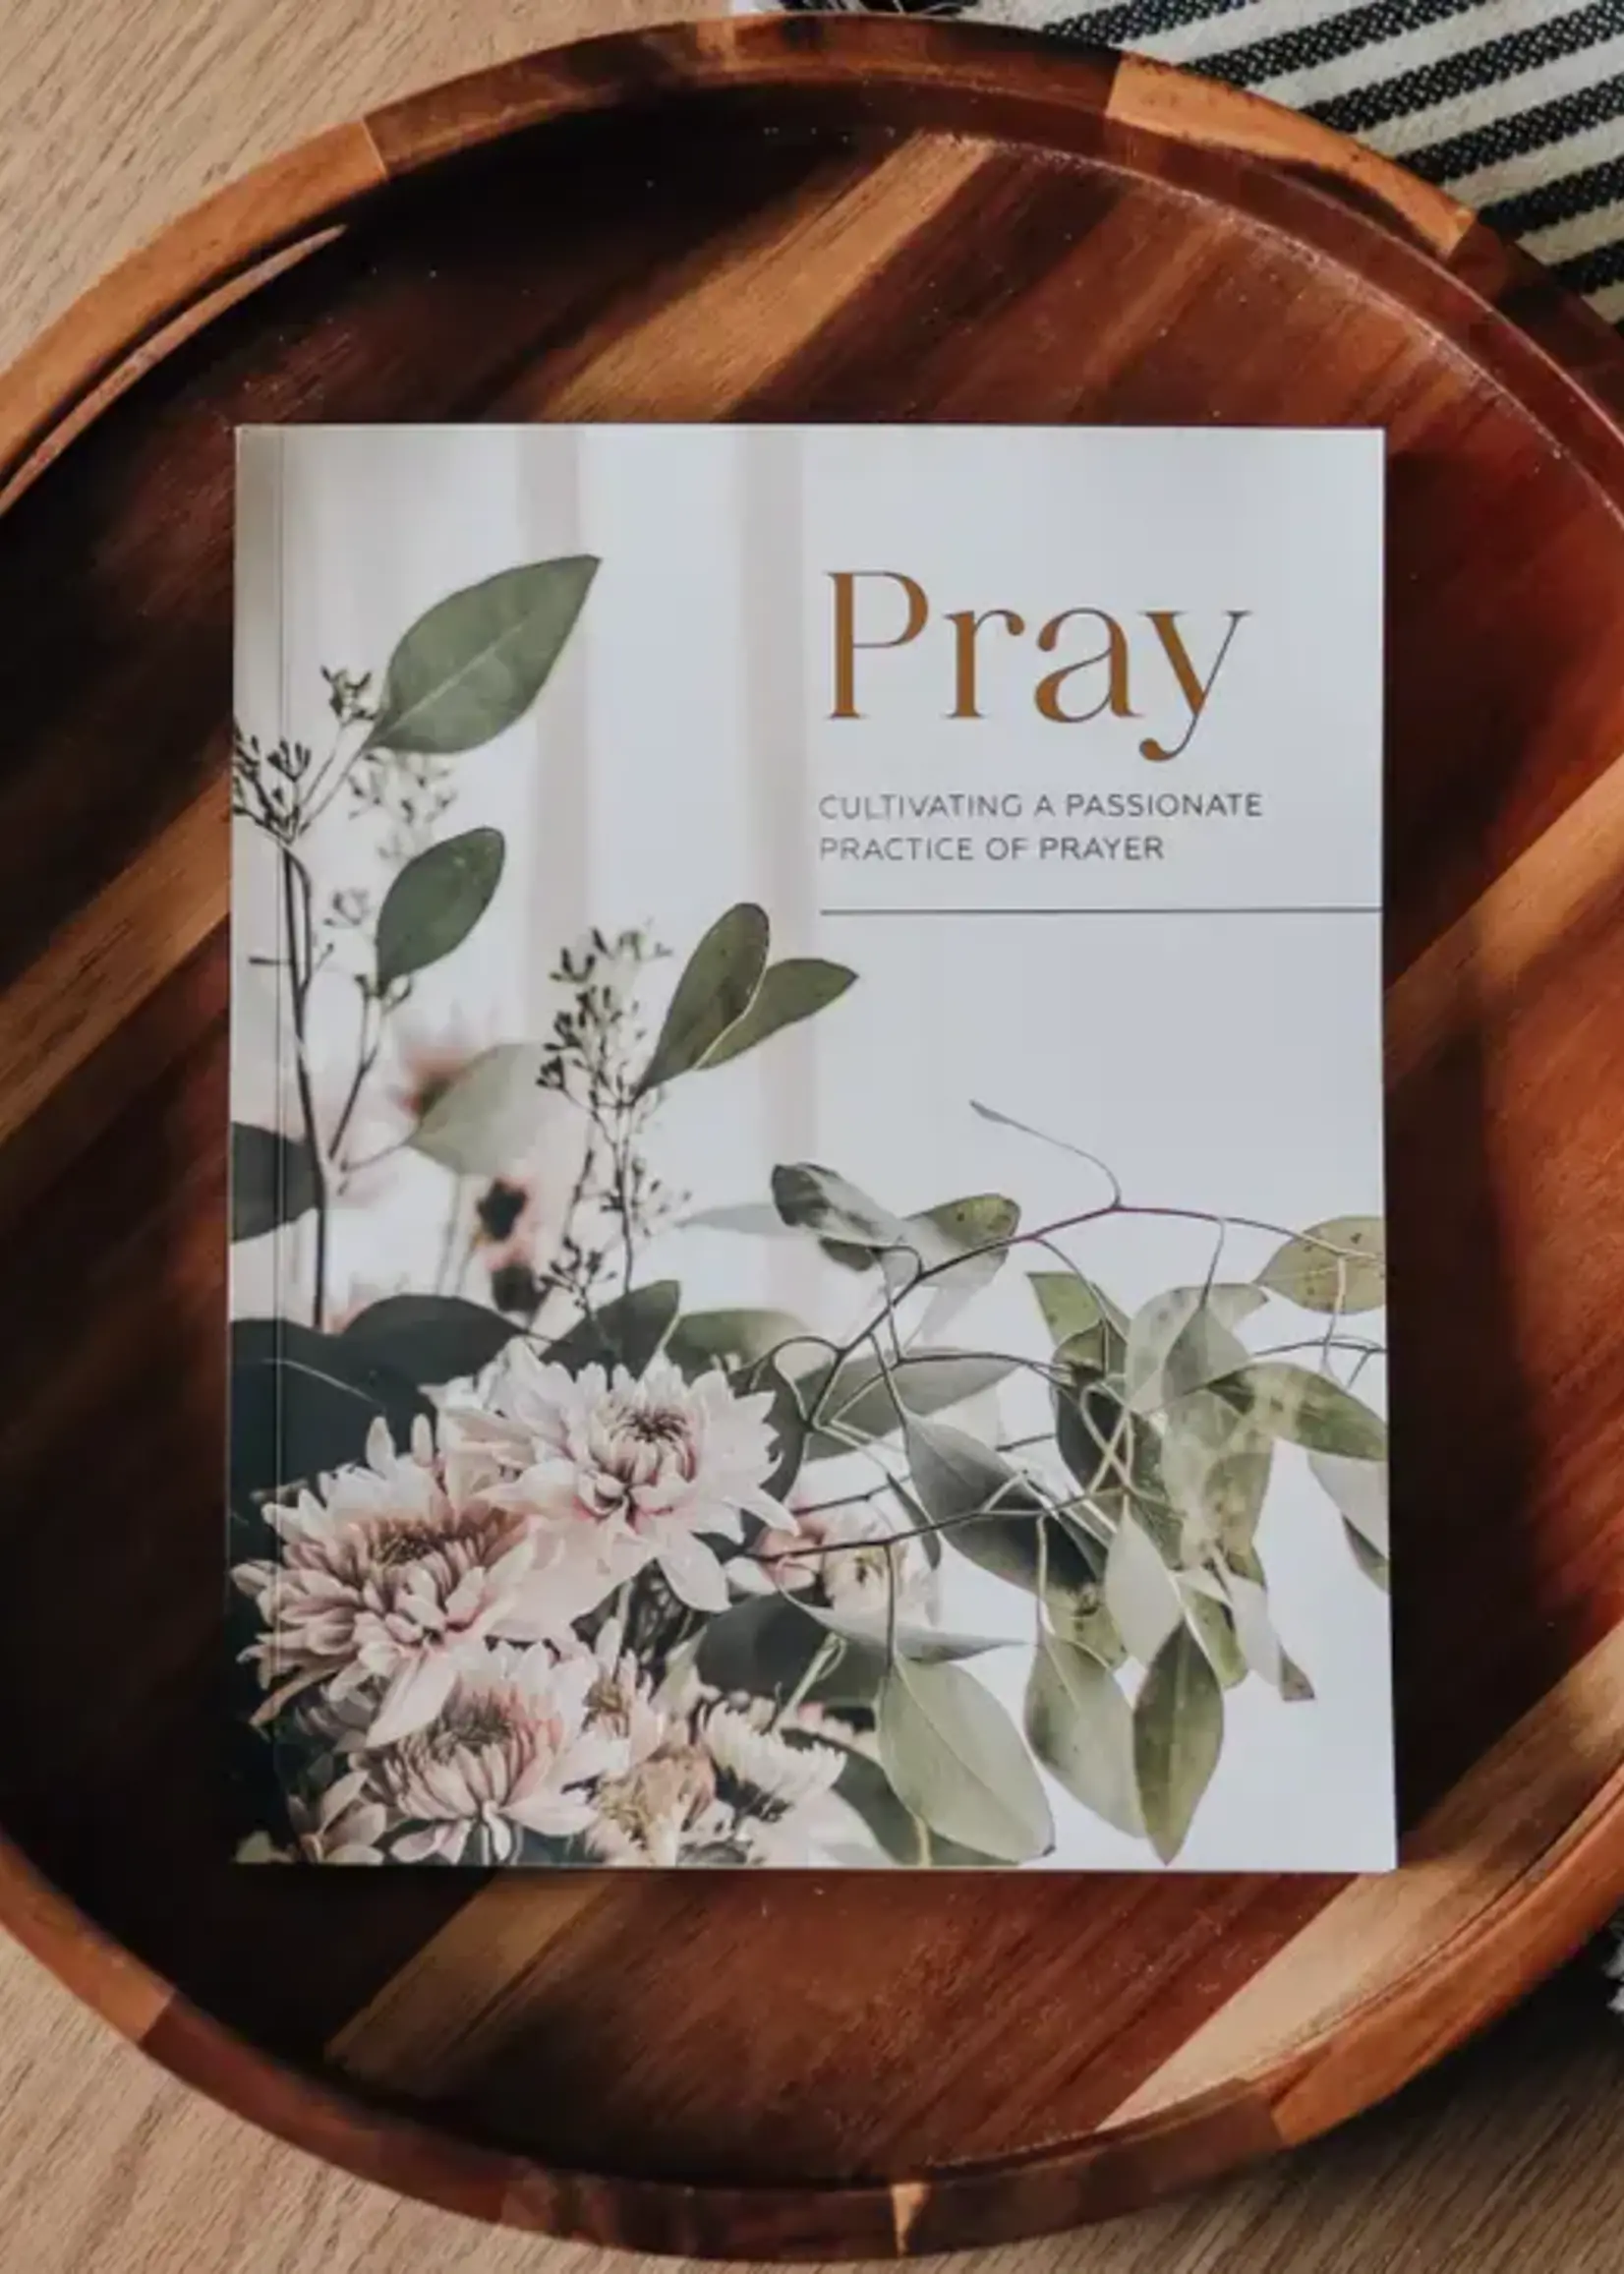 DAILY GRACE CO PRAY CULTIVATING A PASSIONATE PRACTICE OF PRAYER